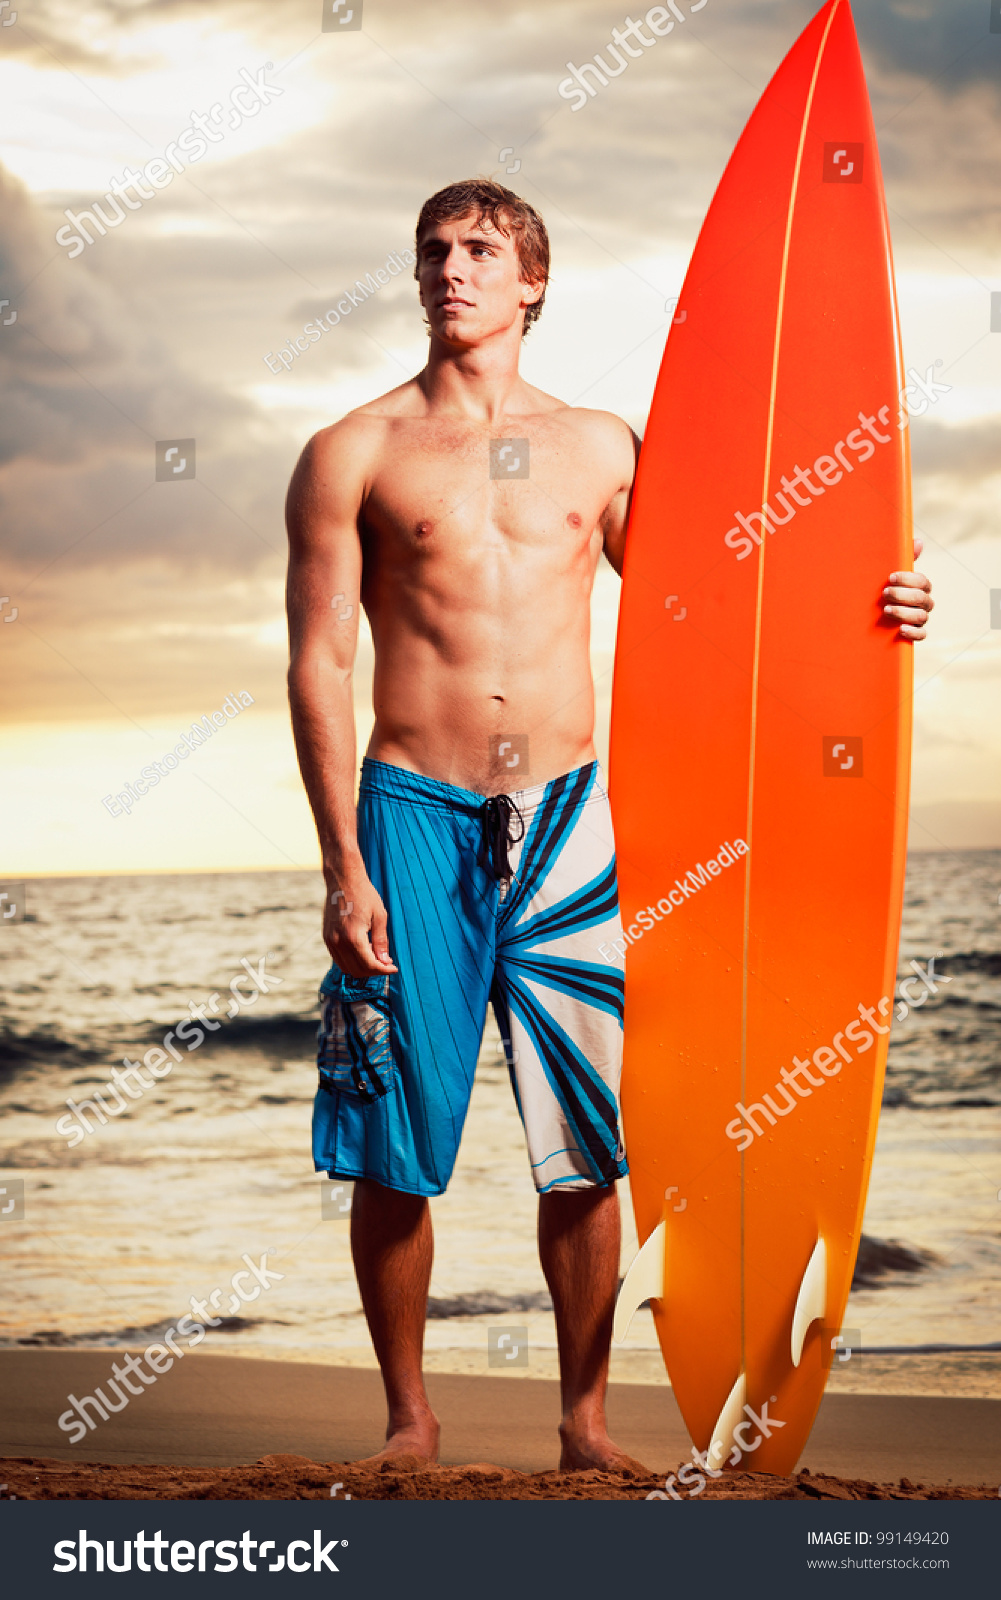 Professional Surfer Holding Surf Board Stock Photo 99149420 - Shutterstock